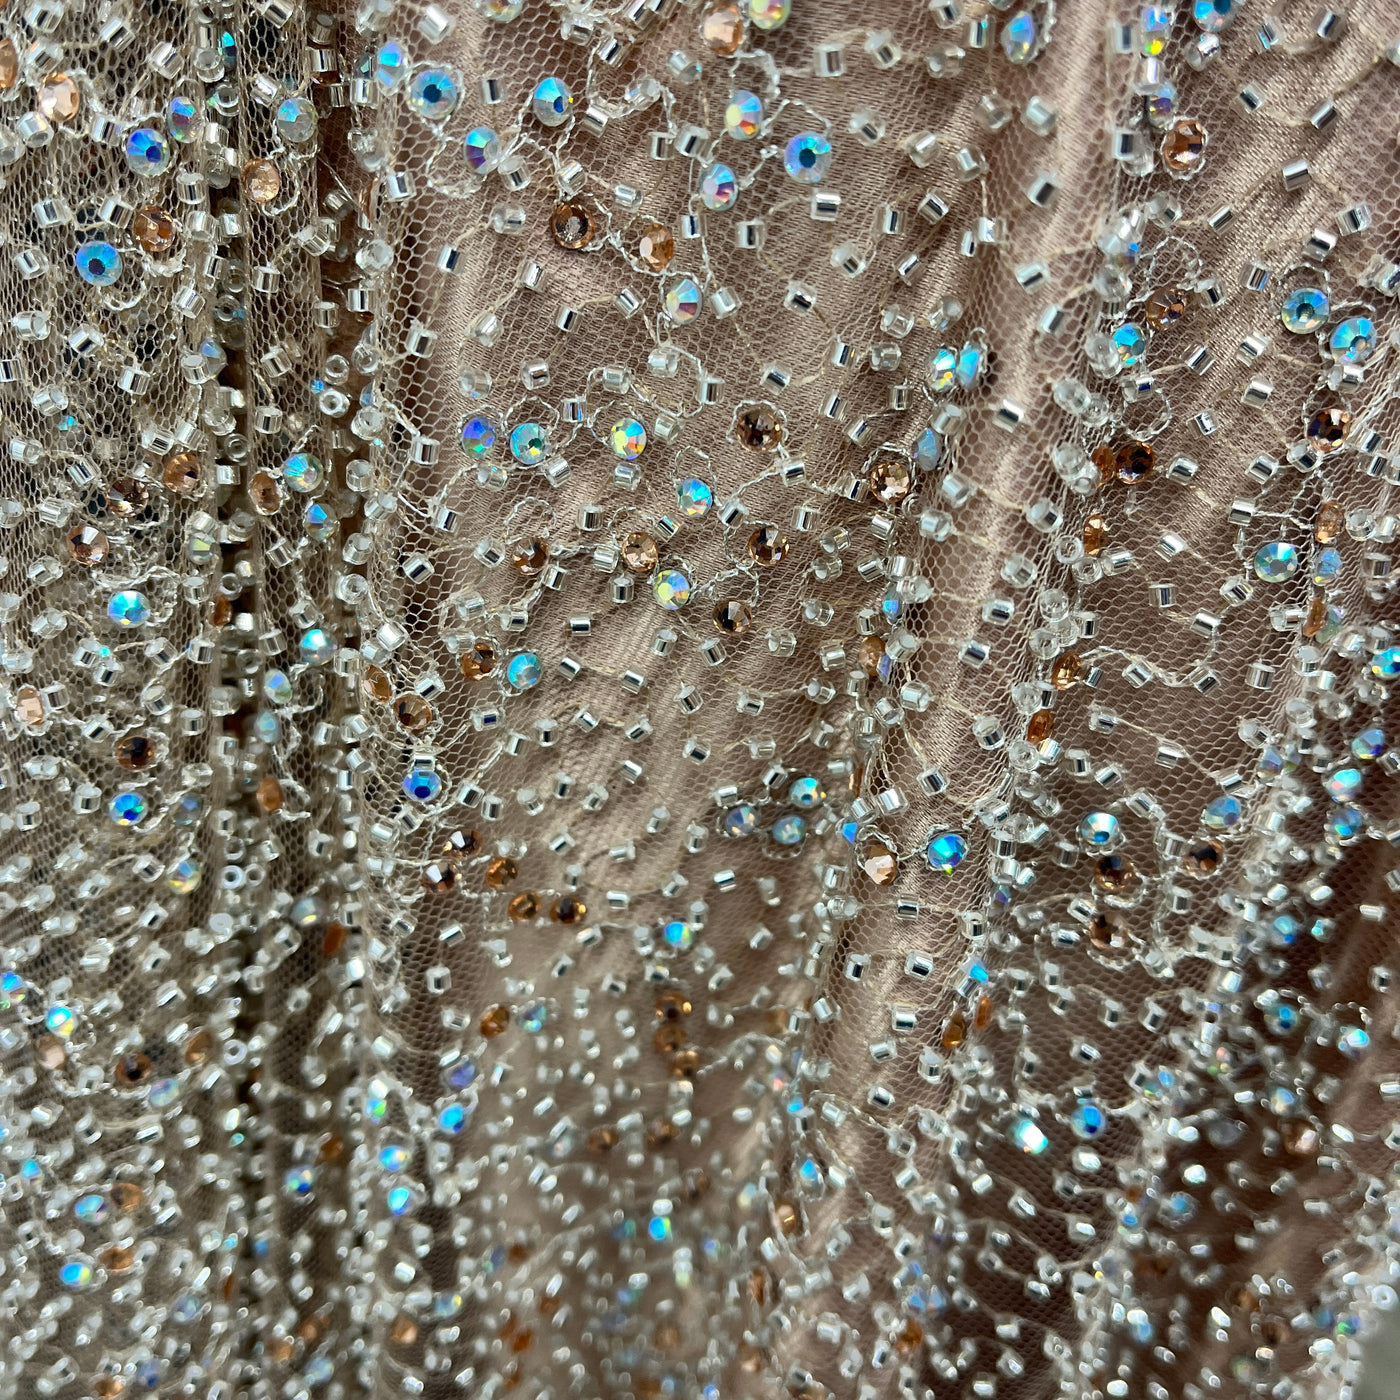 Beaded Lace Fabric Embroidered on 100% Polyester Net Mesh | Lace USA - GD-2251 - 60" Wide